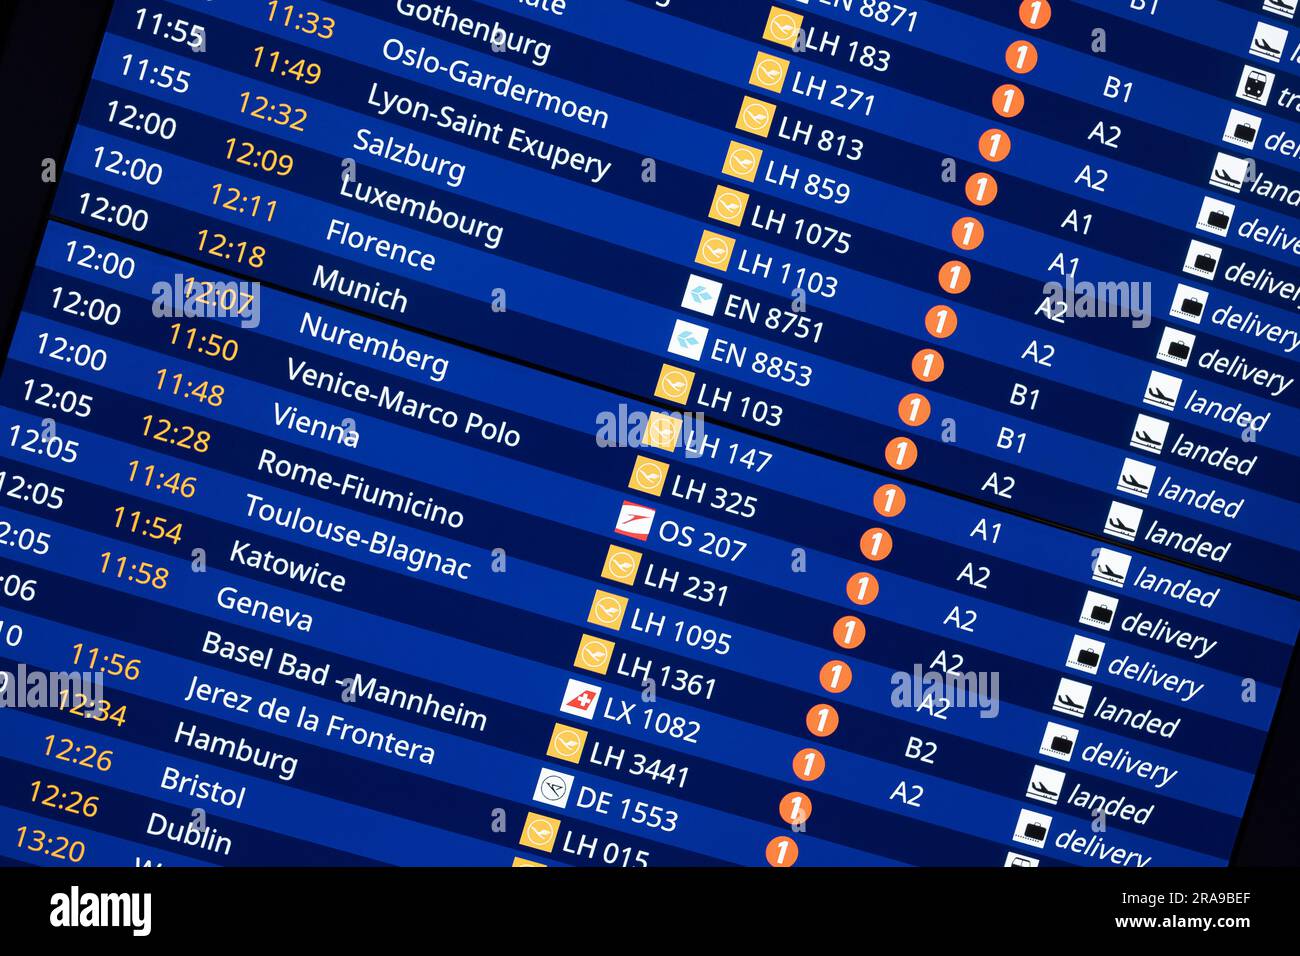 Frankfurt Airport, display boards for arrived flights Stock Photo